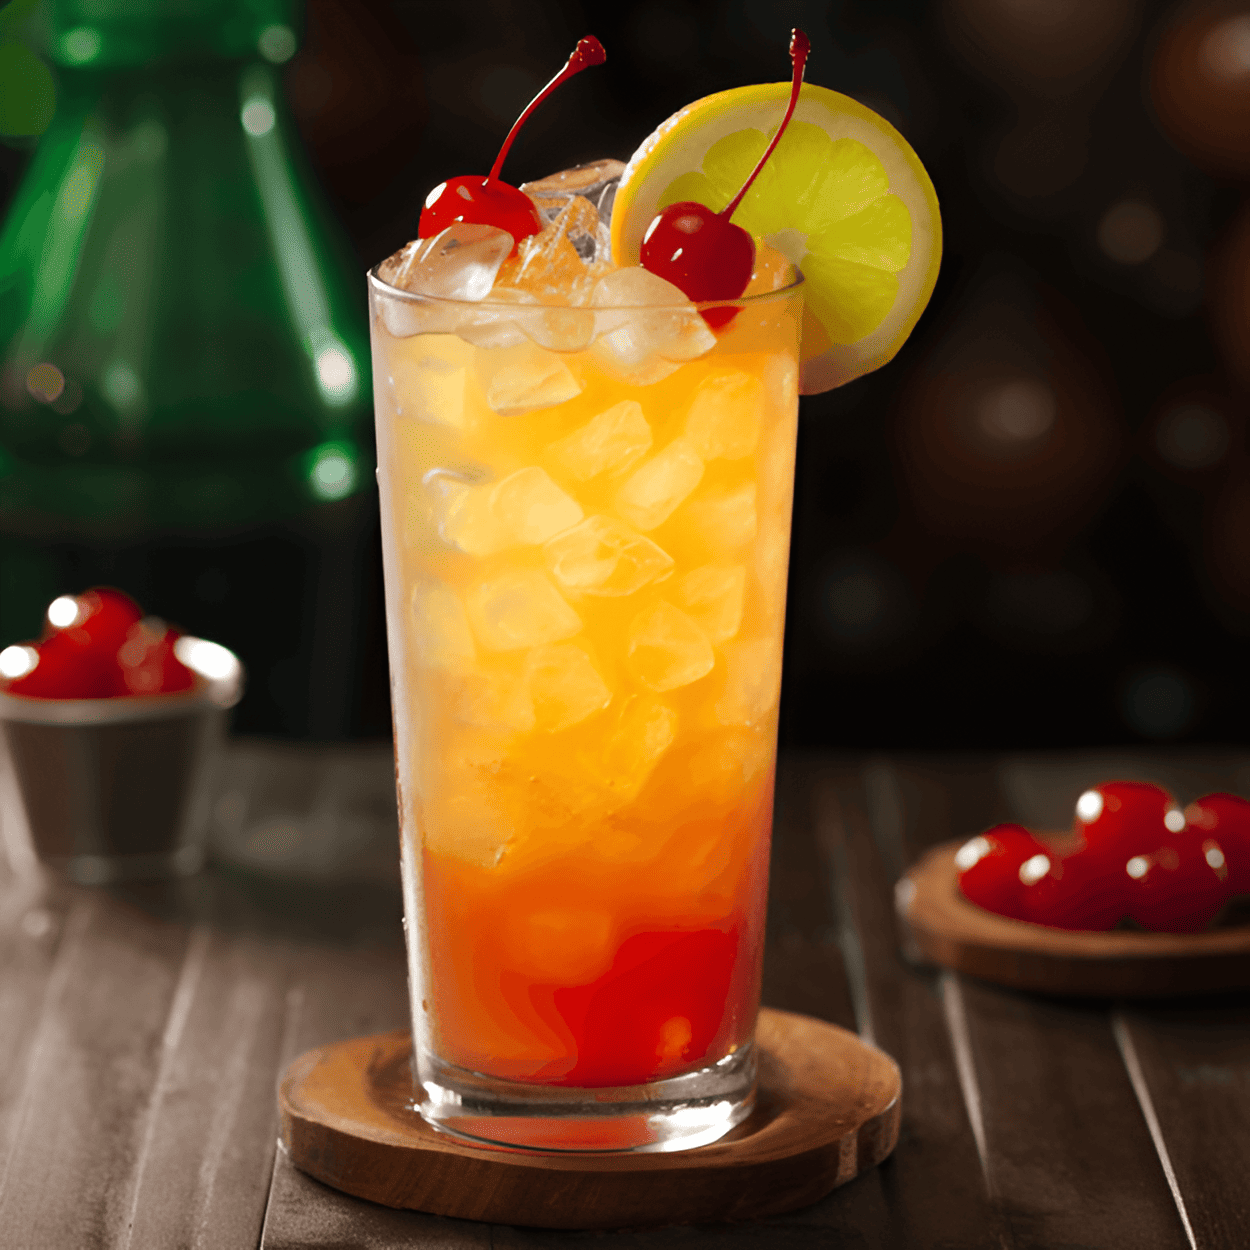 Tropical Cherry Rum Cocktail Recipe - The Tropical Cherry Rum cocktail is a sweet, fruity cocktail with a hint of tartness from the cherry. The rum adds a strong, spicy kick that balances out the sweetness. It's a refreshing, invigorating drink with a tropical twist.